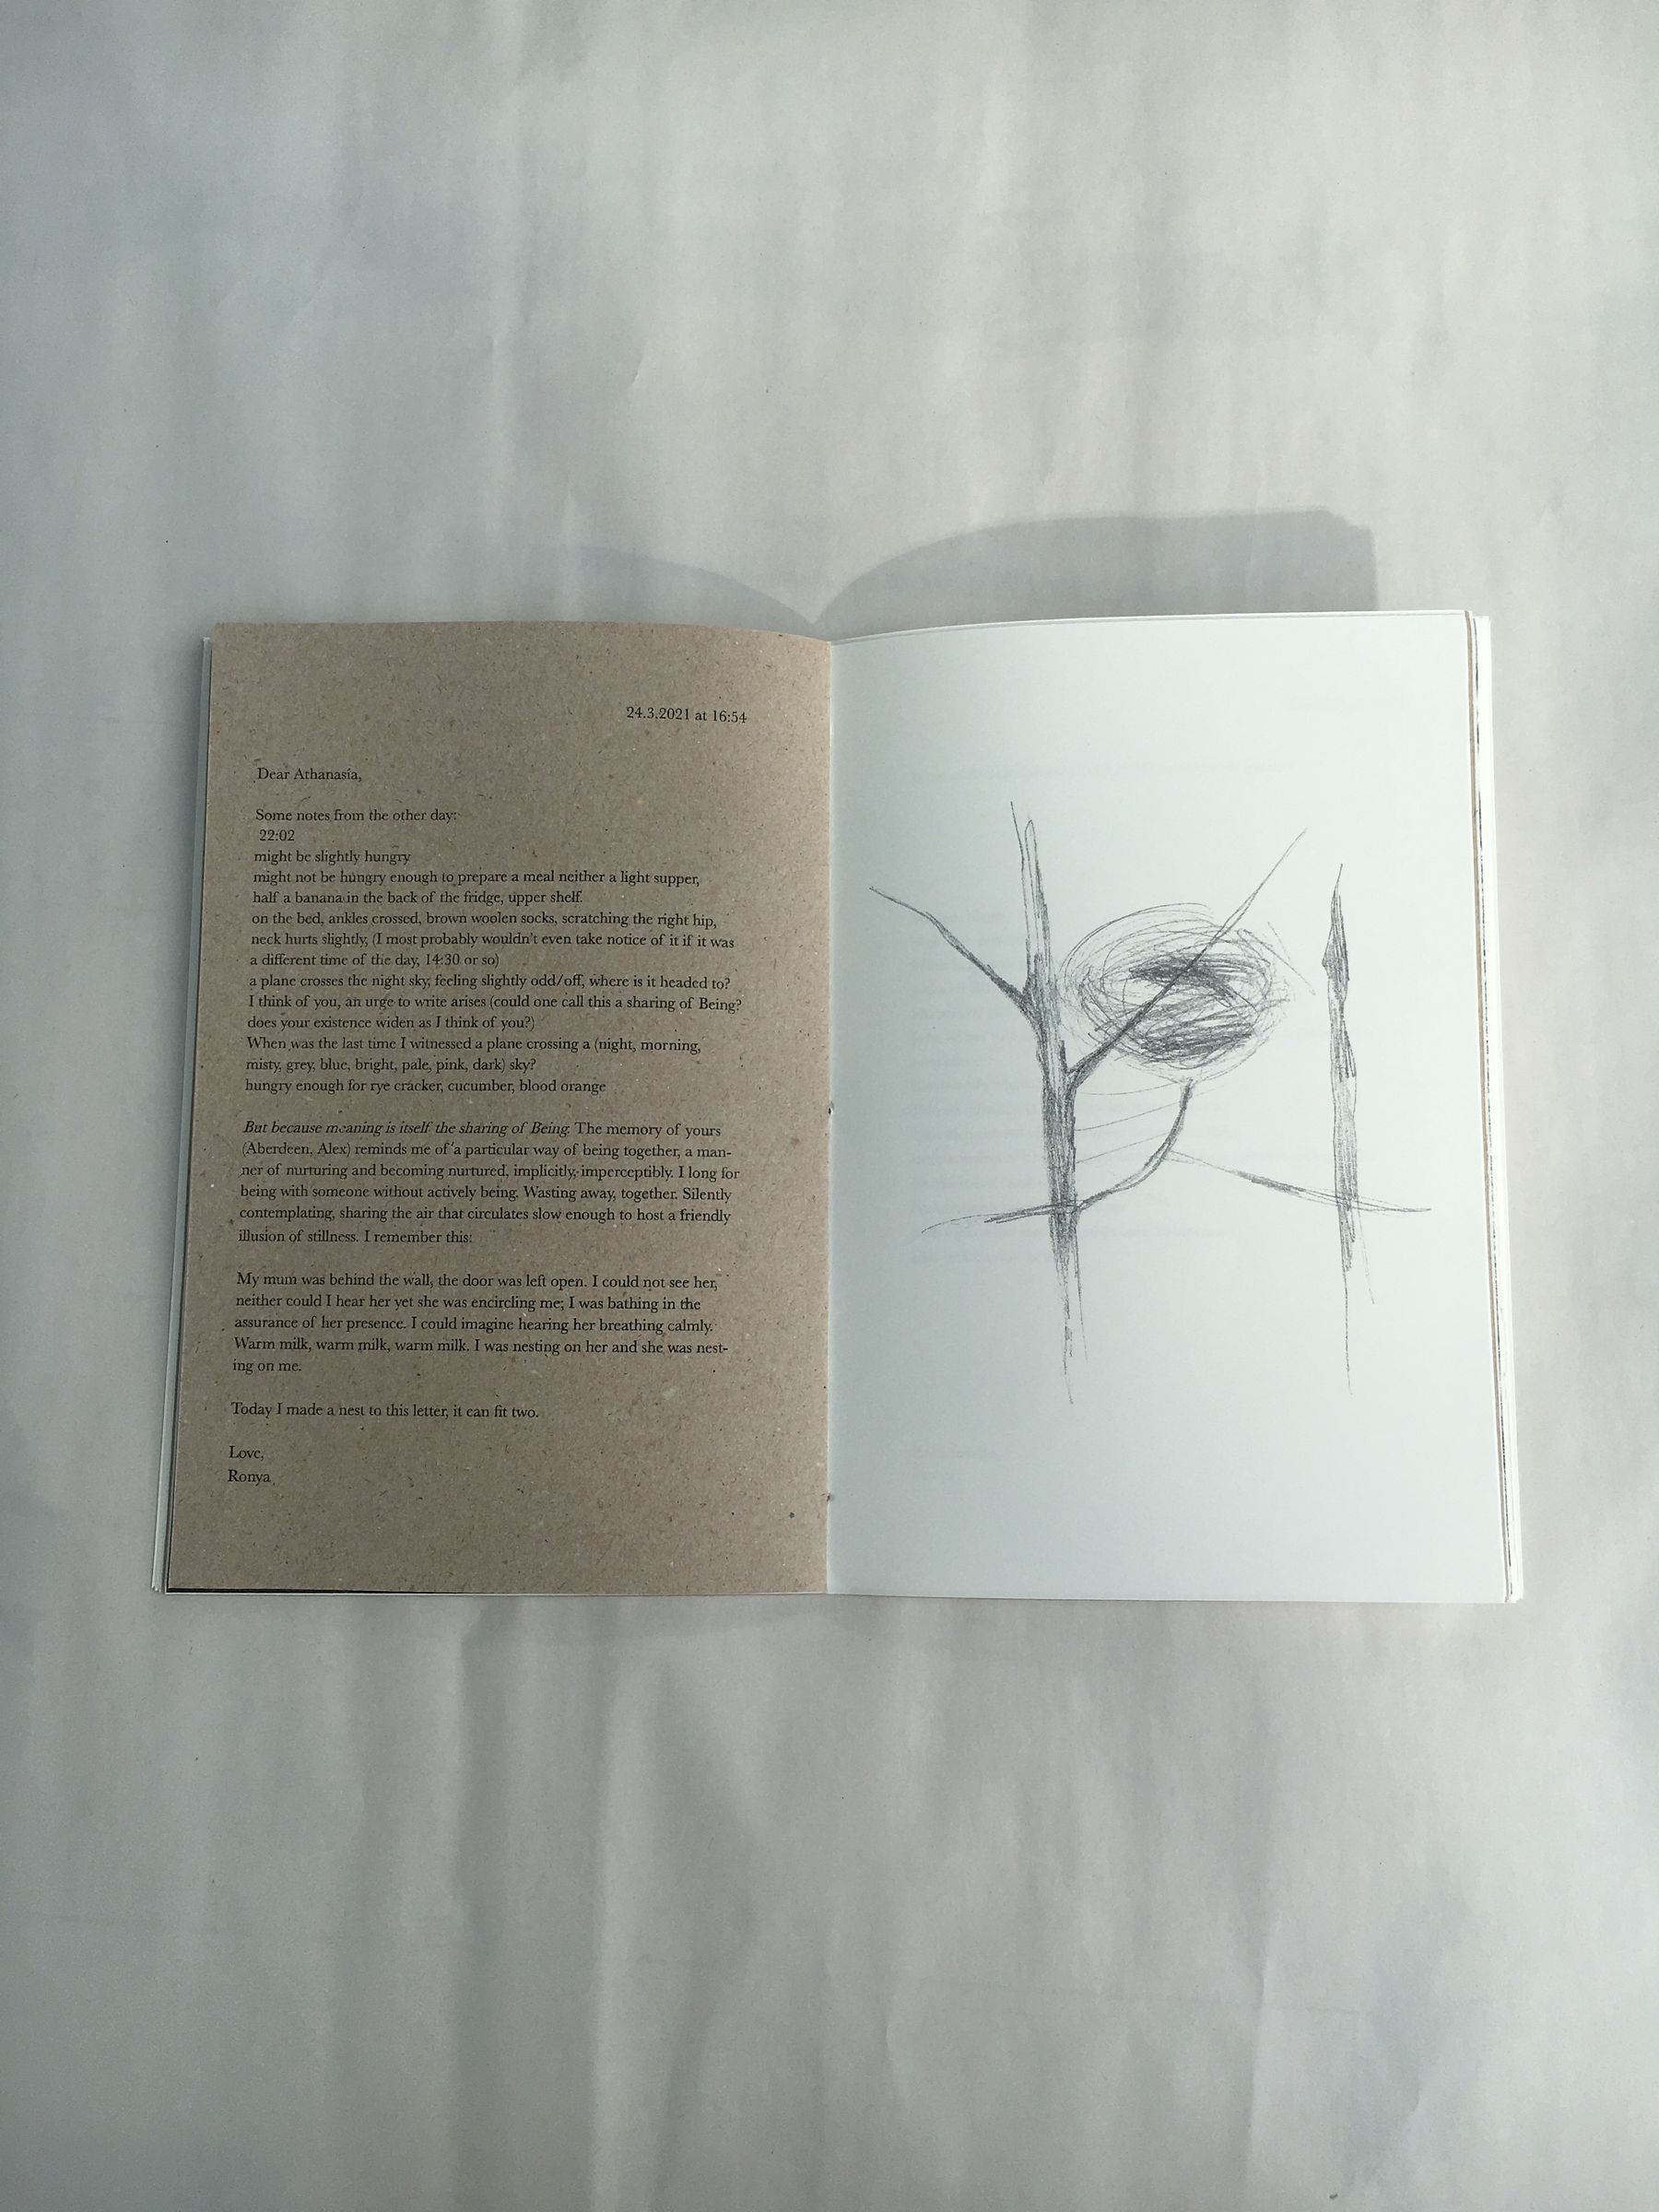 The book lays open at a page of text and a page containing an illustration of a nest.